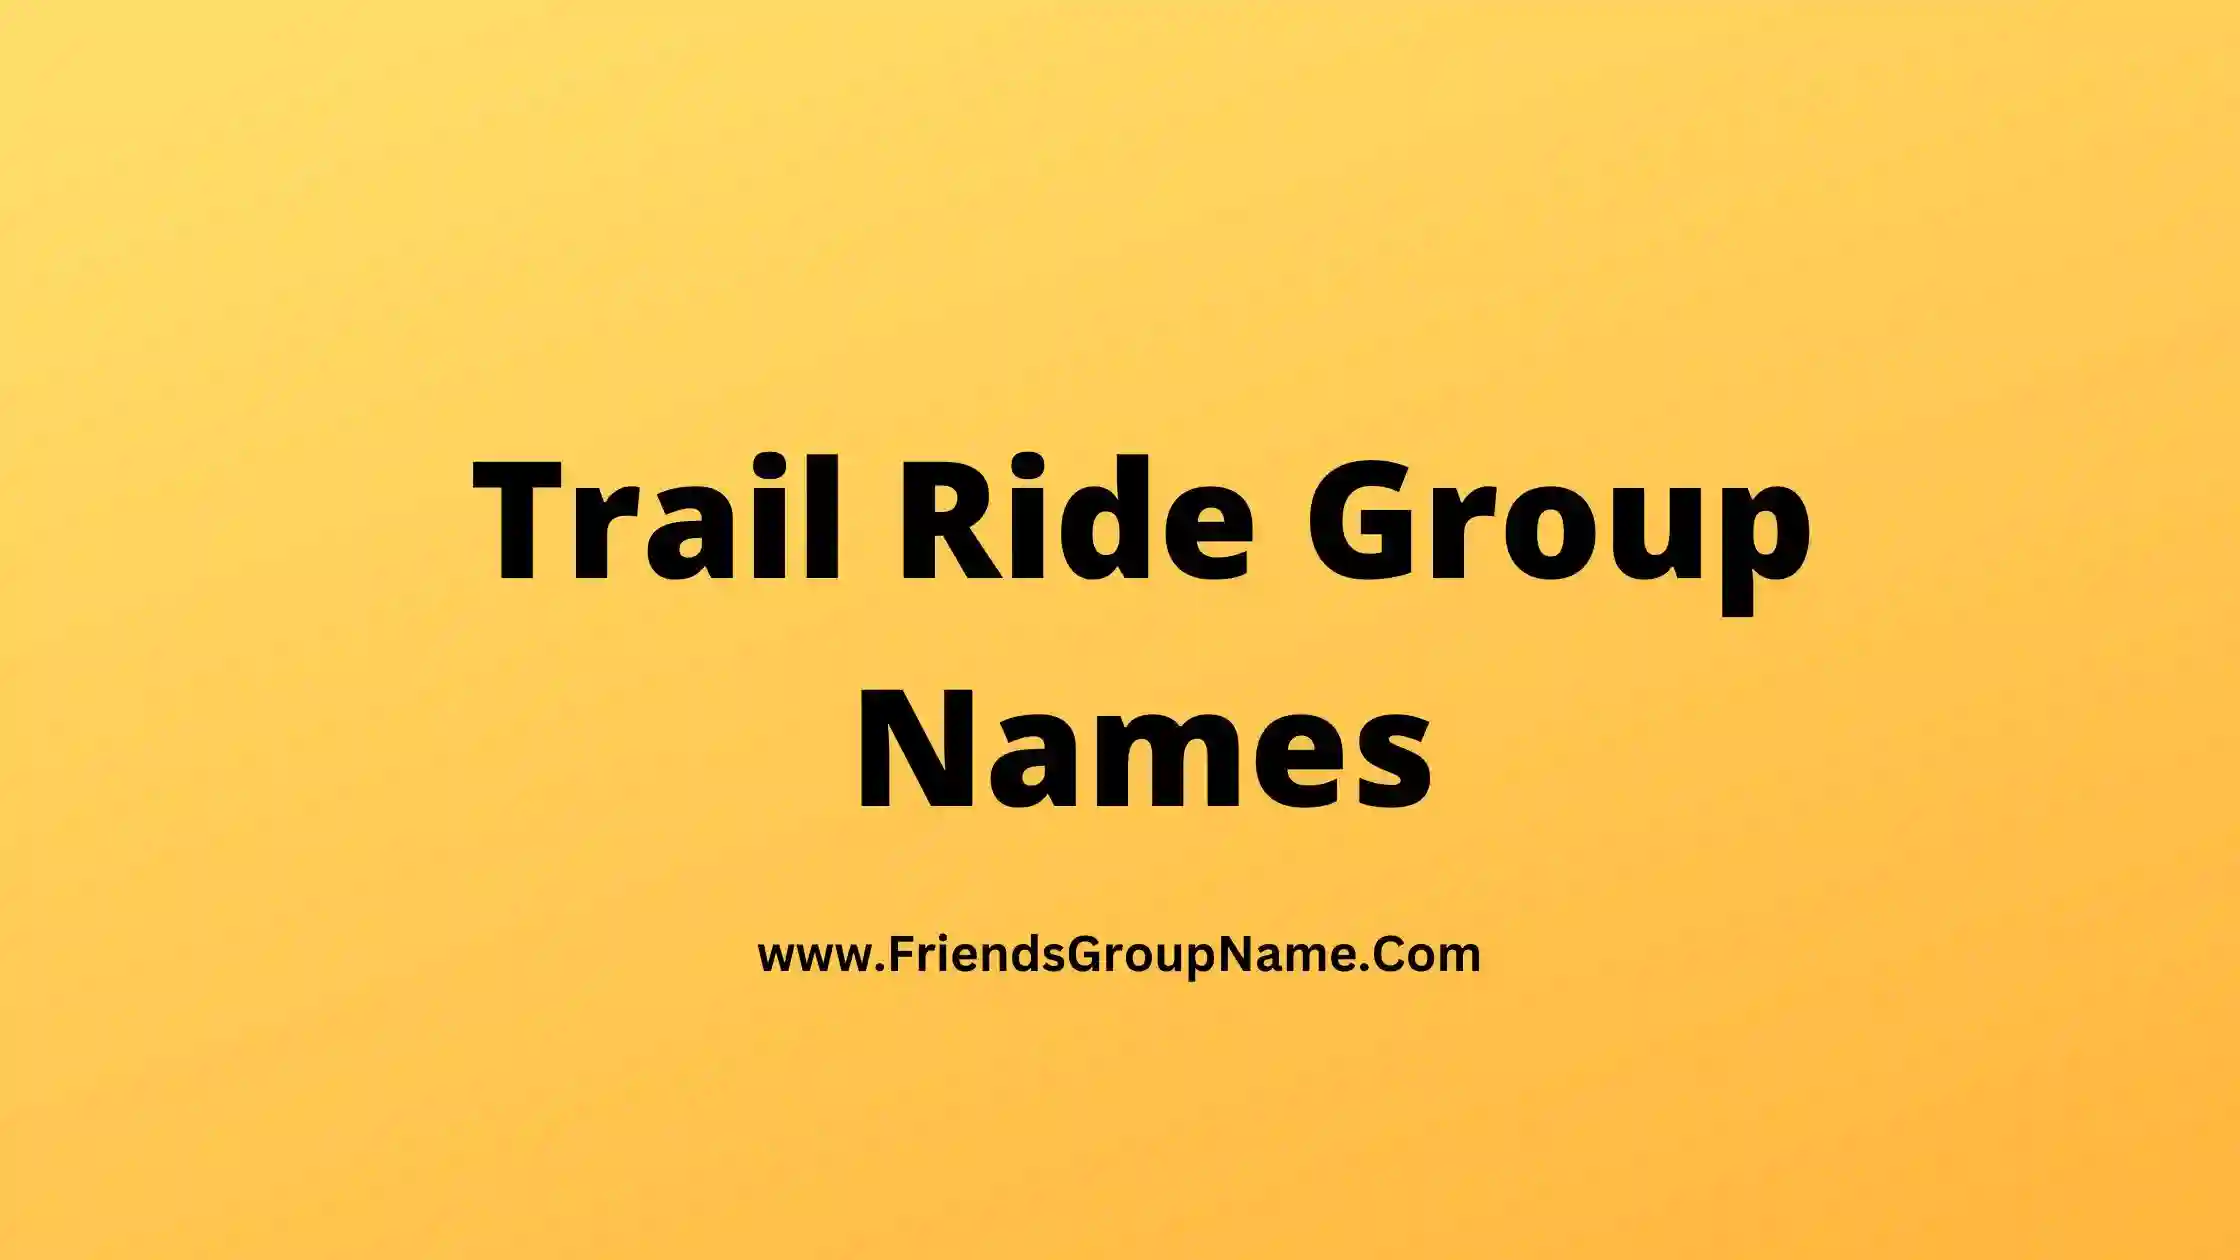 Trail Ride Group Names